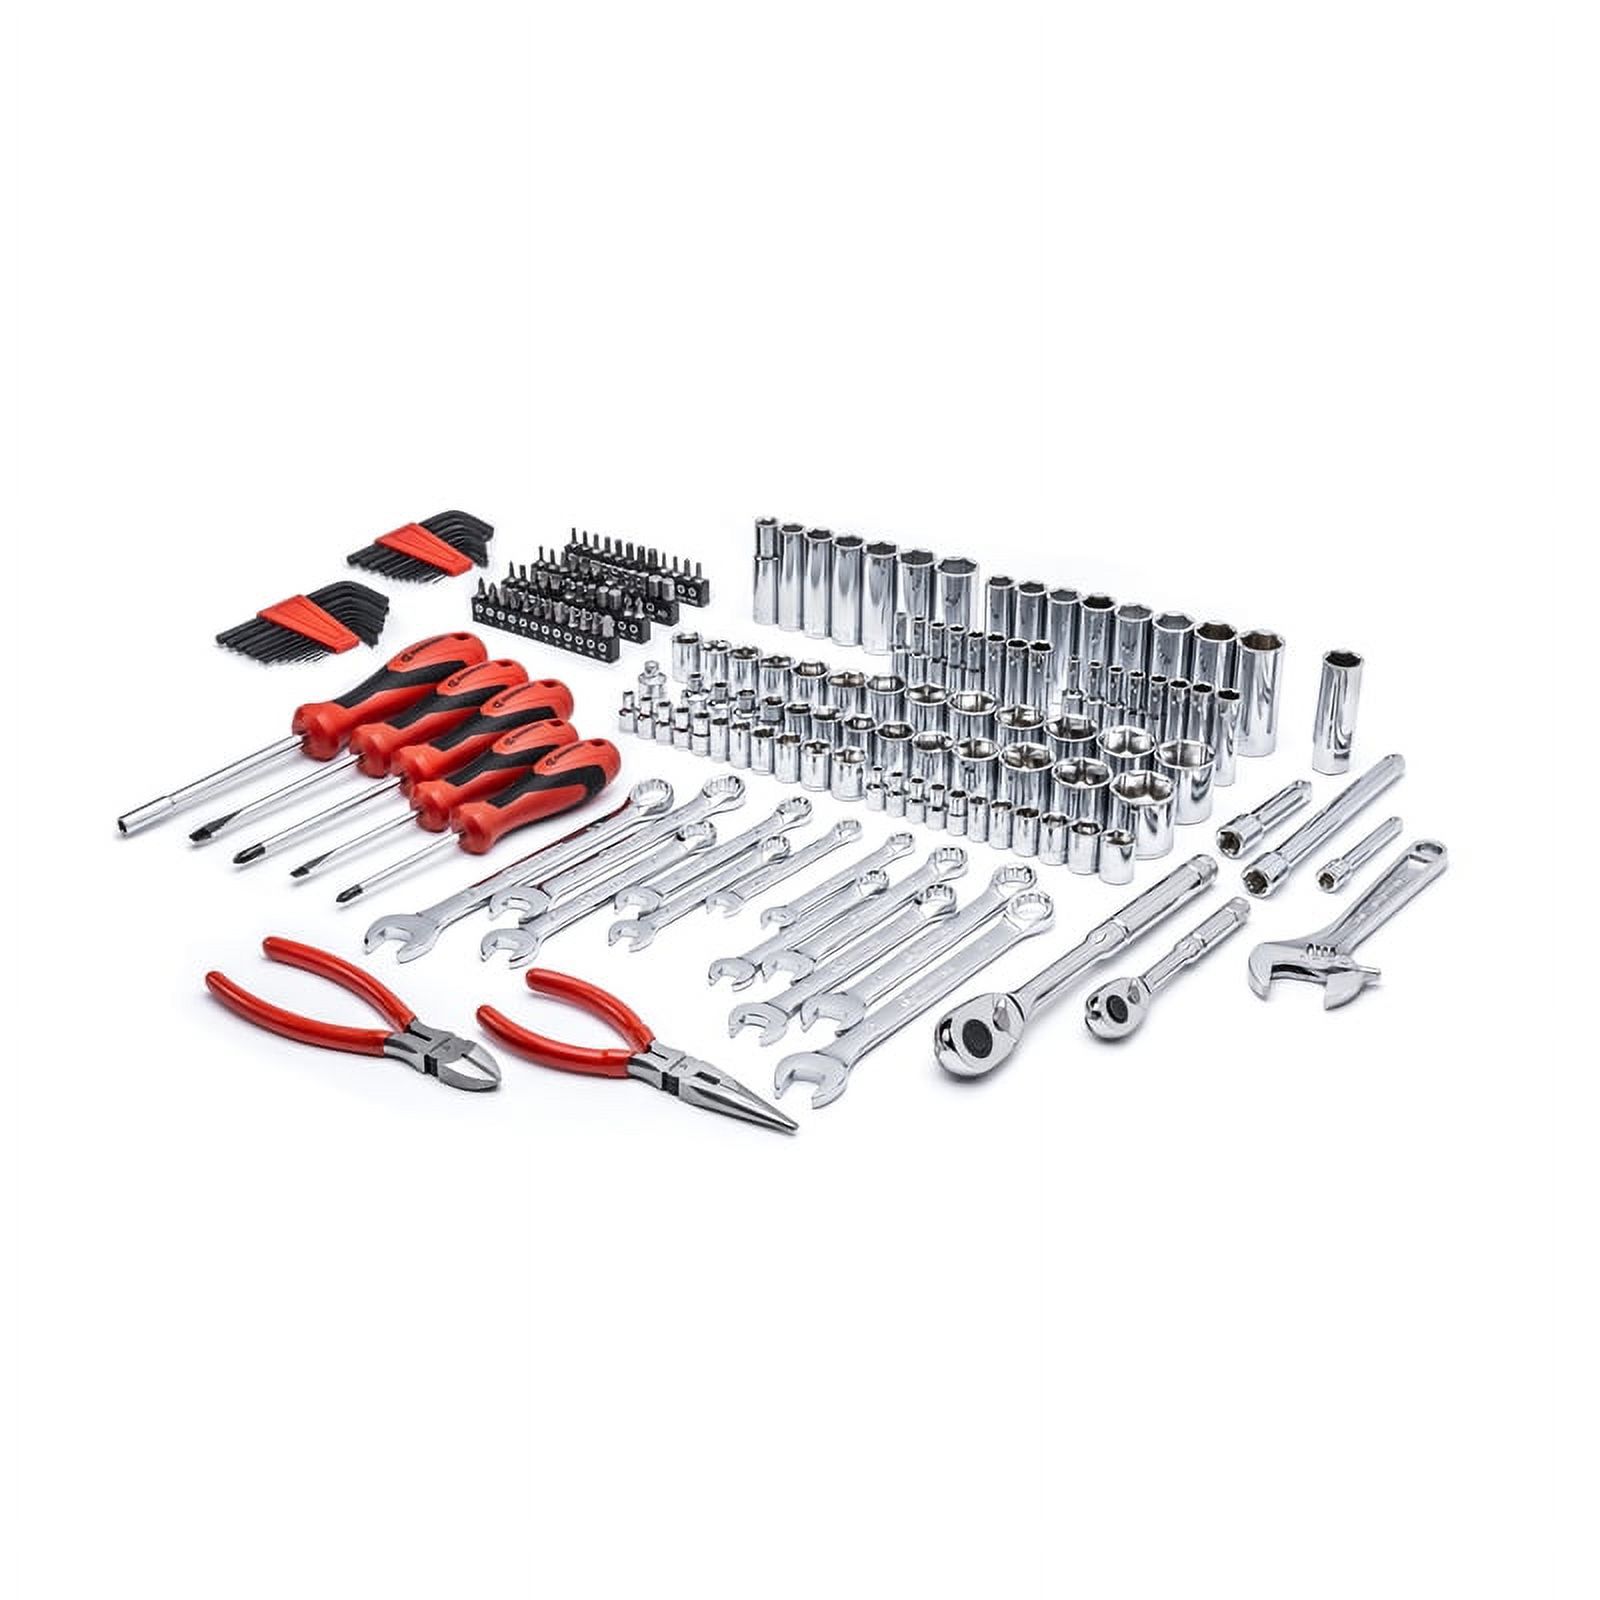 Crescent 180-Piece Professional Tool Set Tool Organizer and GEARWRENCH 20-Piece SAE/Metric Ratchet Combination Wrench Set